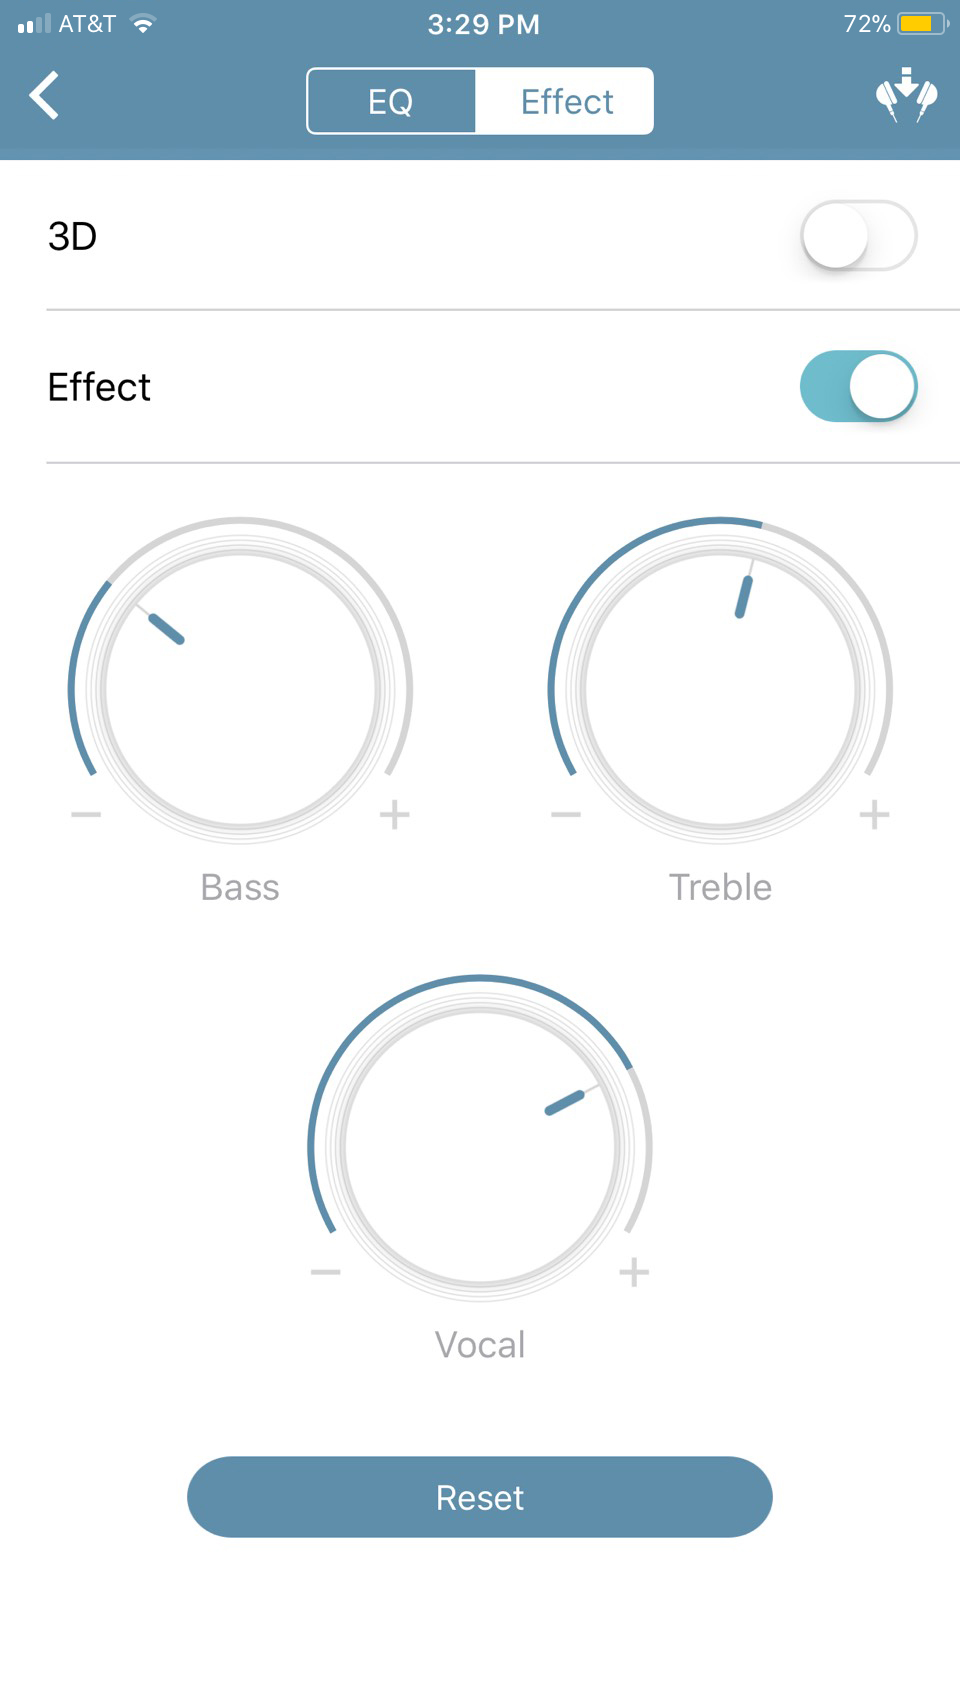 Customizable effects include bass, treble and vocal adjustments, and 3D surround sound